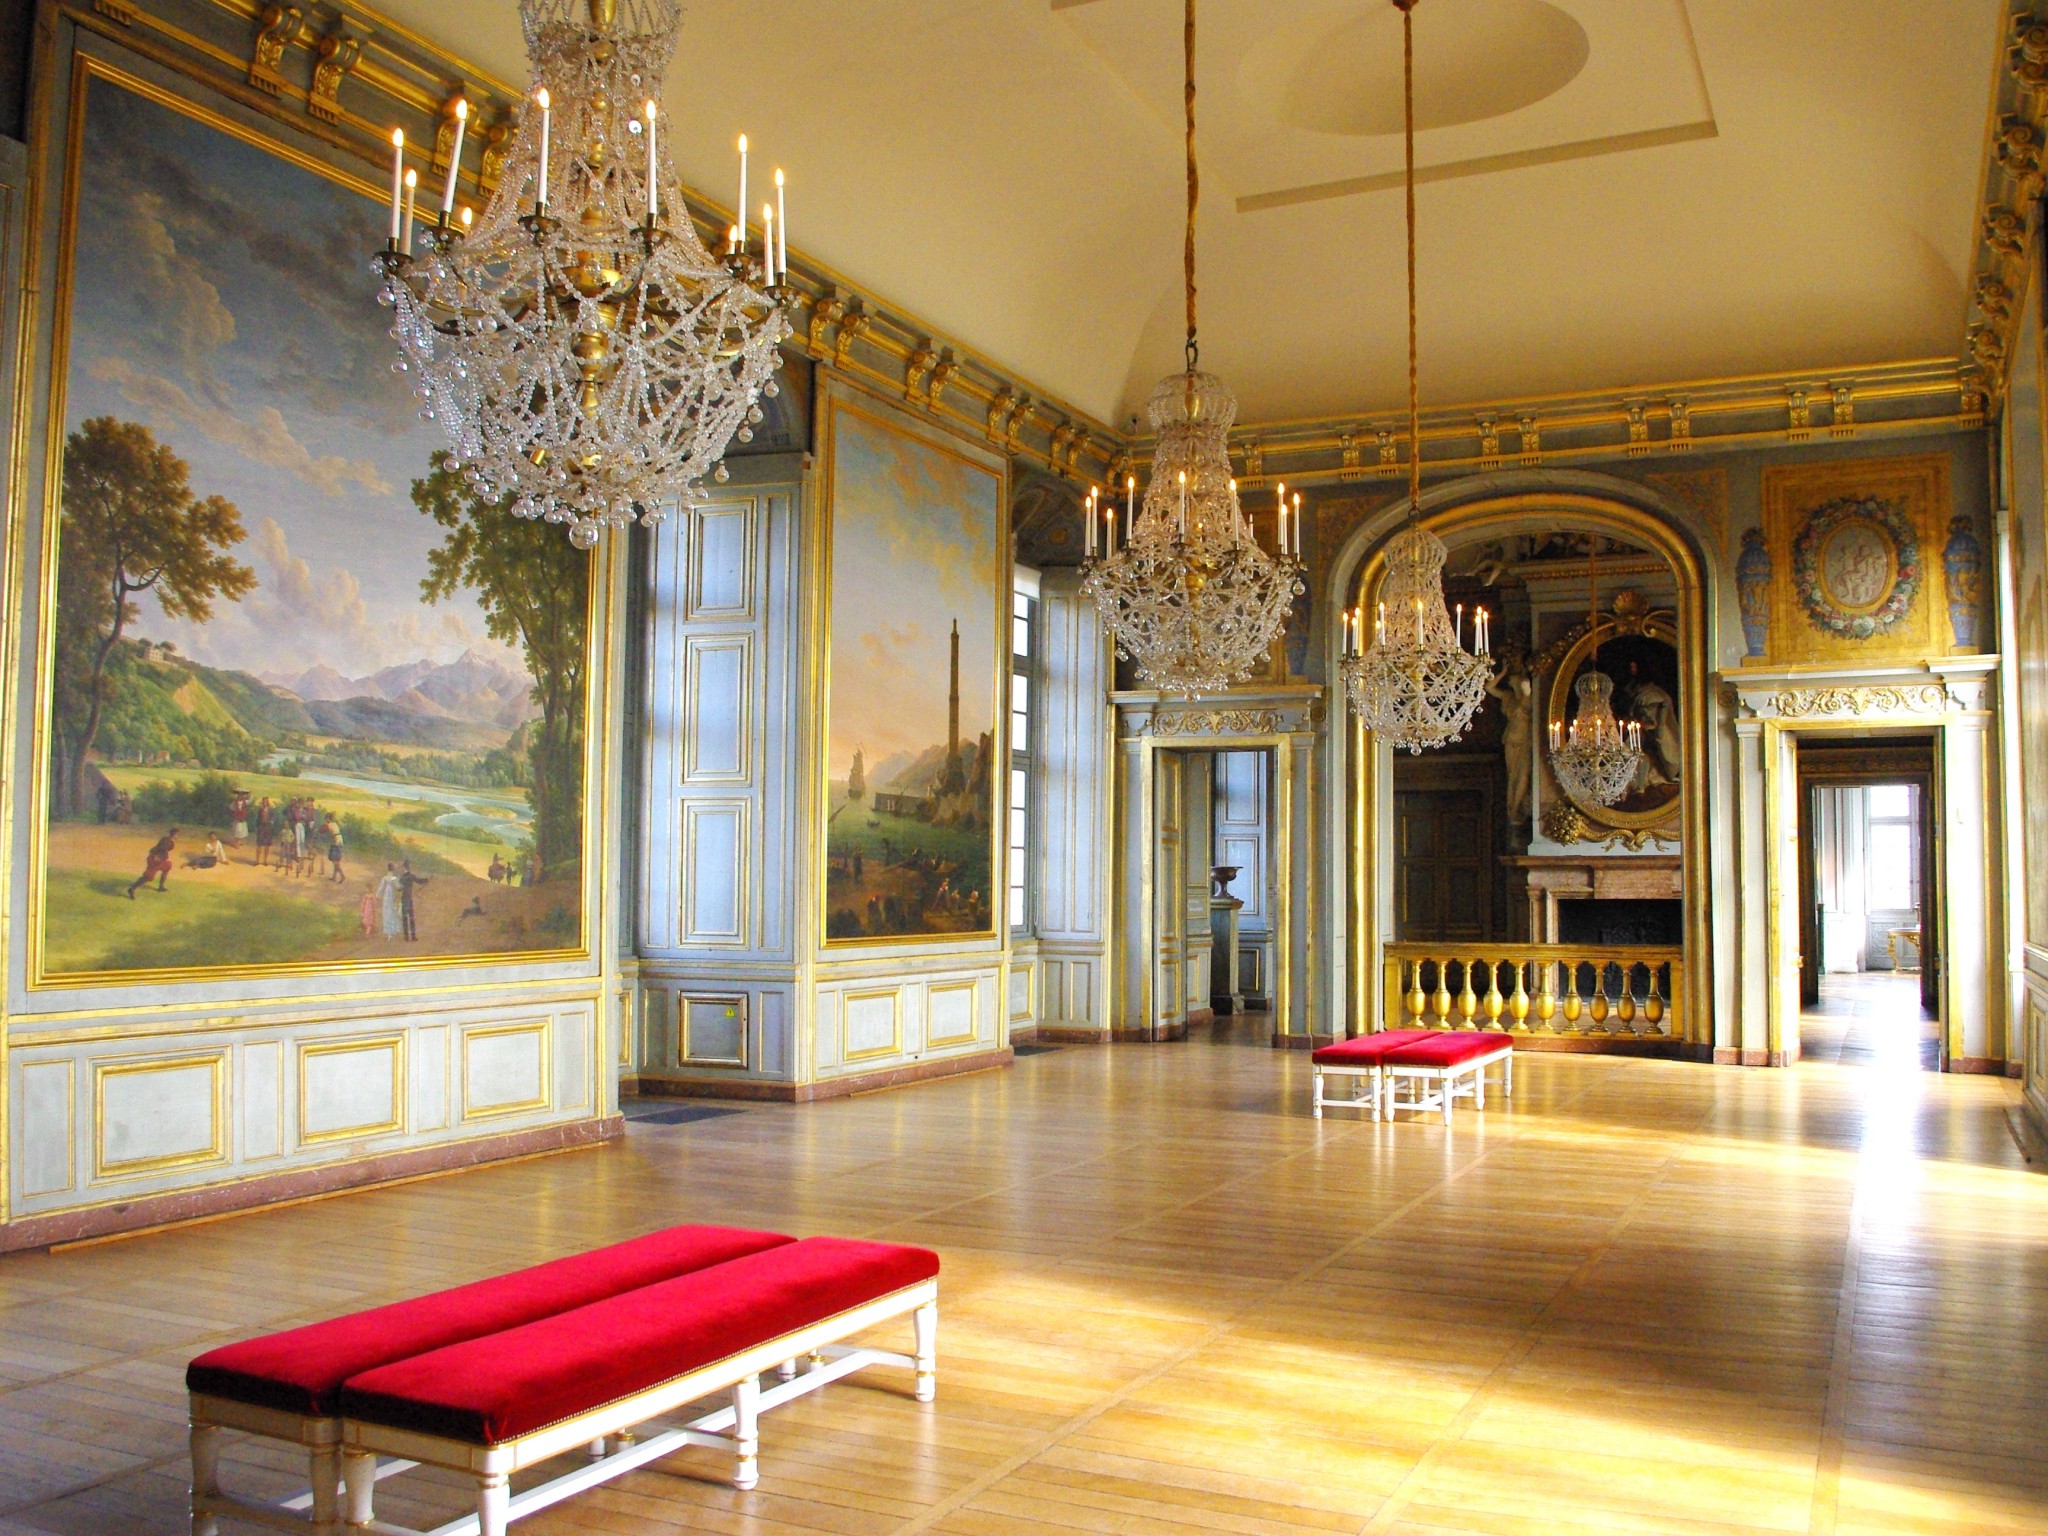 Inside the chateau of Maisons-Laffitte - the grand ballroom © French Moments